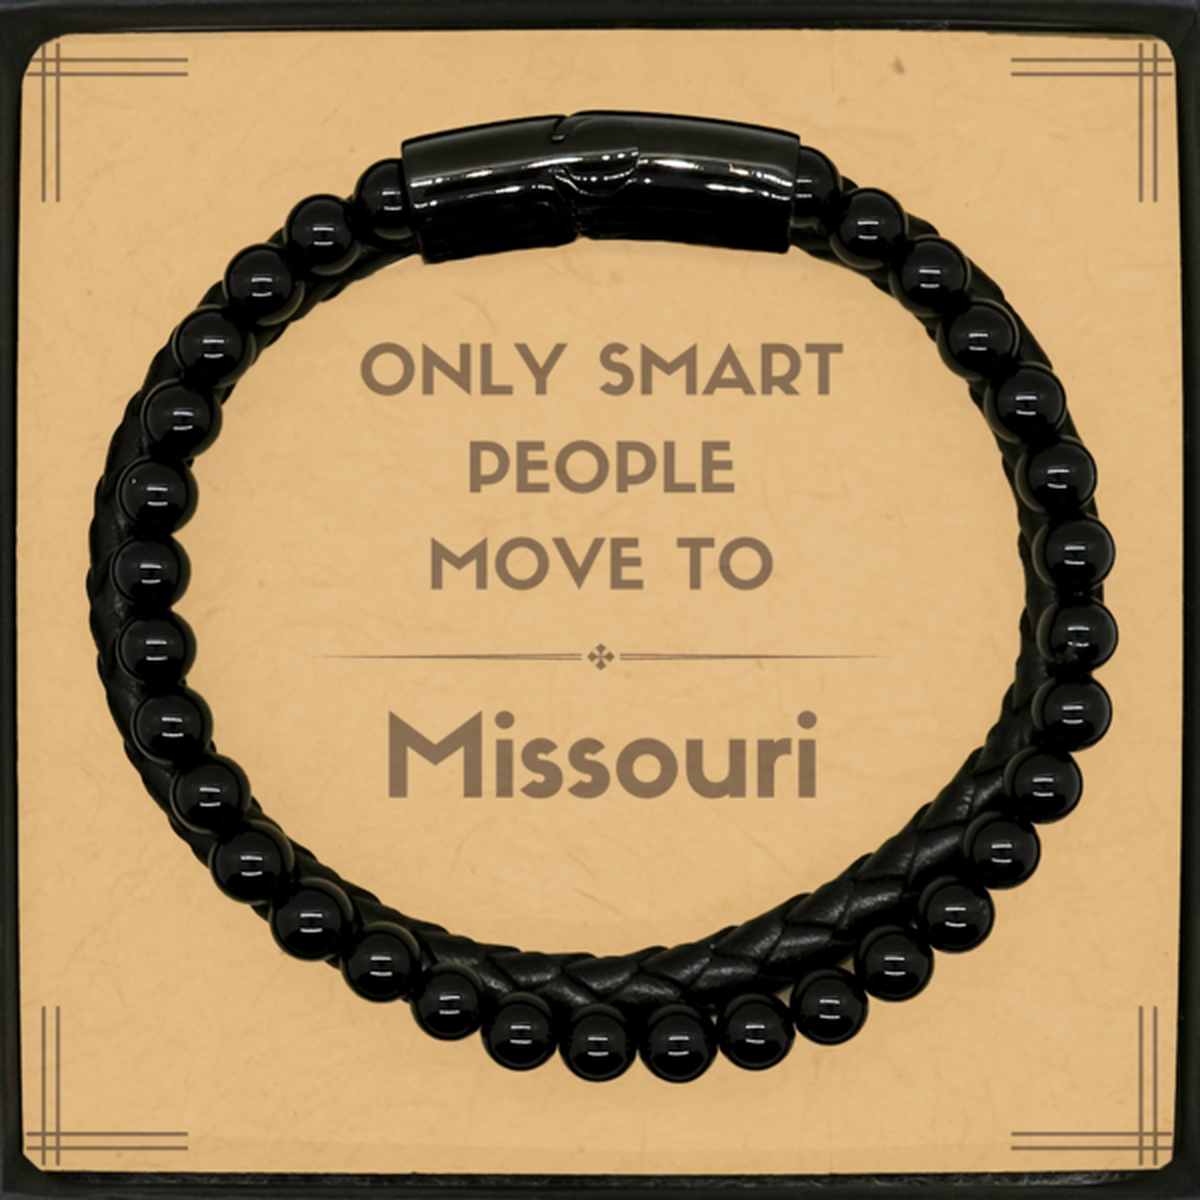 Only smart people move to Missouri Stone Leather Bracelets, Message Card Gifts For Missouri, Move to Missouri Gifts for Friends Coworker Funny Saying Quote